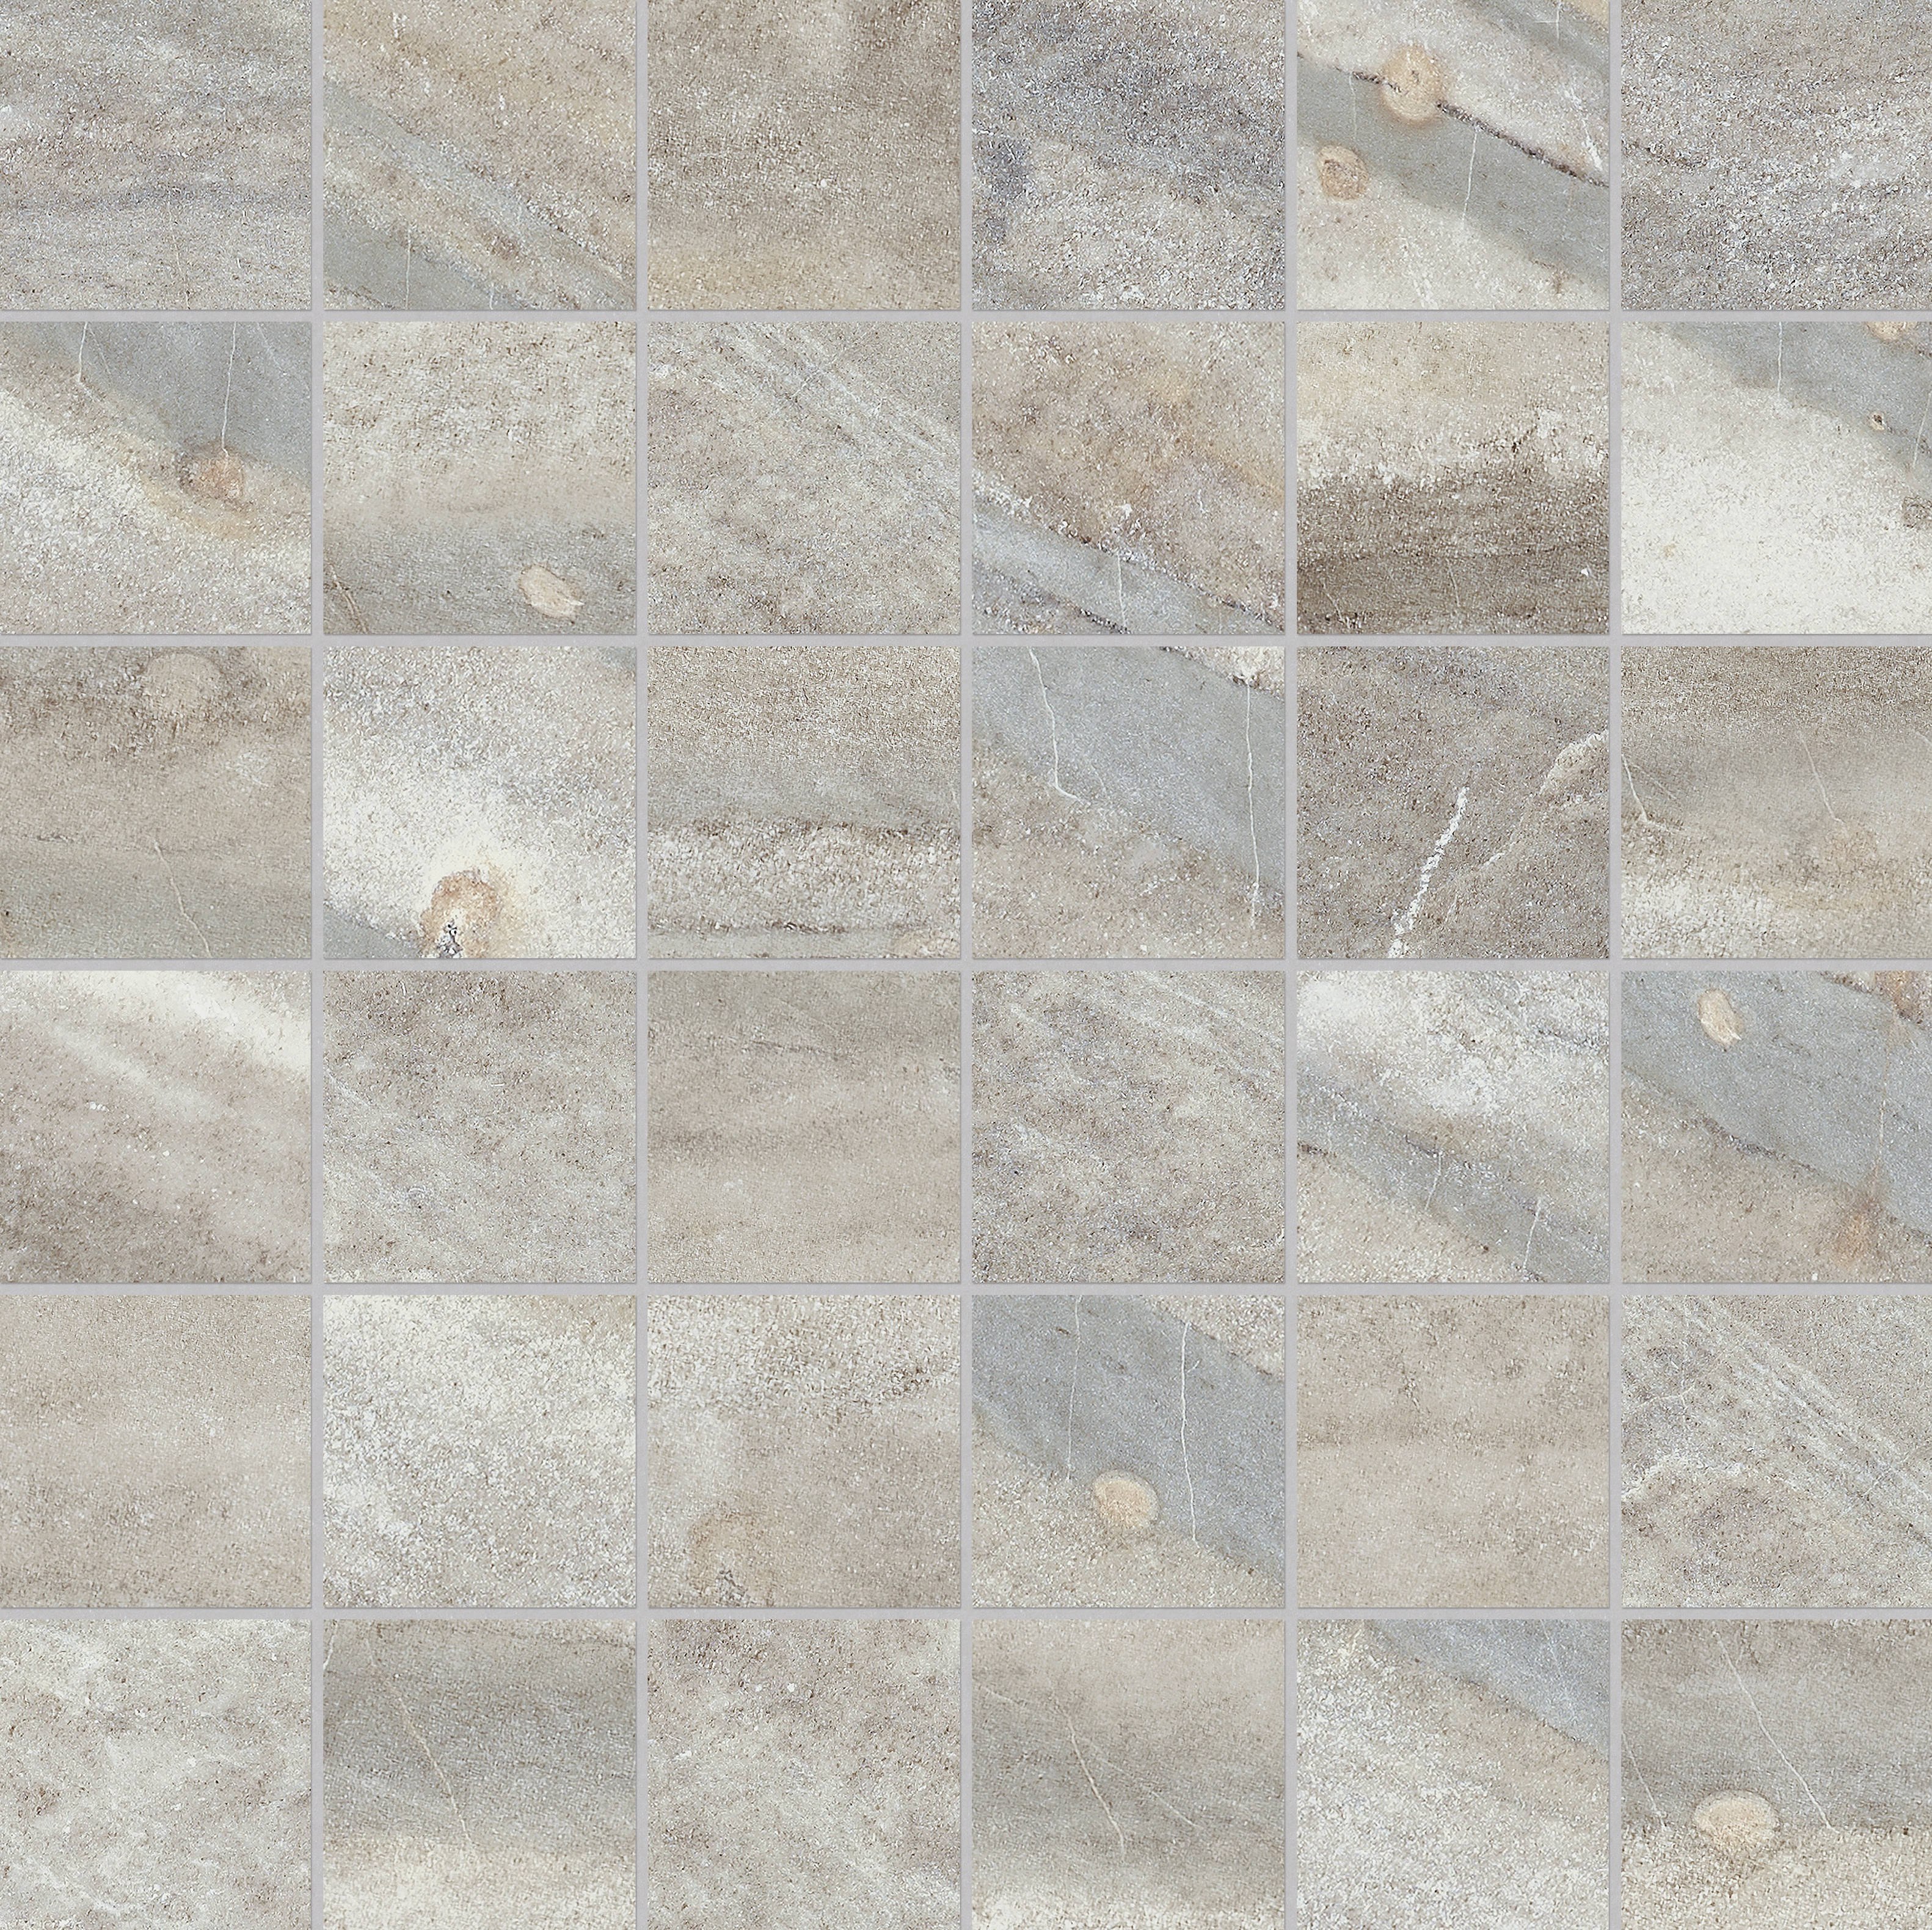 sand straight stack 2x2-inch pattern glazed porcelain mosaic from evolution anatolia collection distributed by surface group international matte finish straight edge edge mesh shape